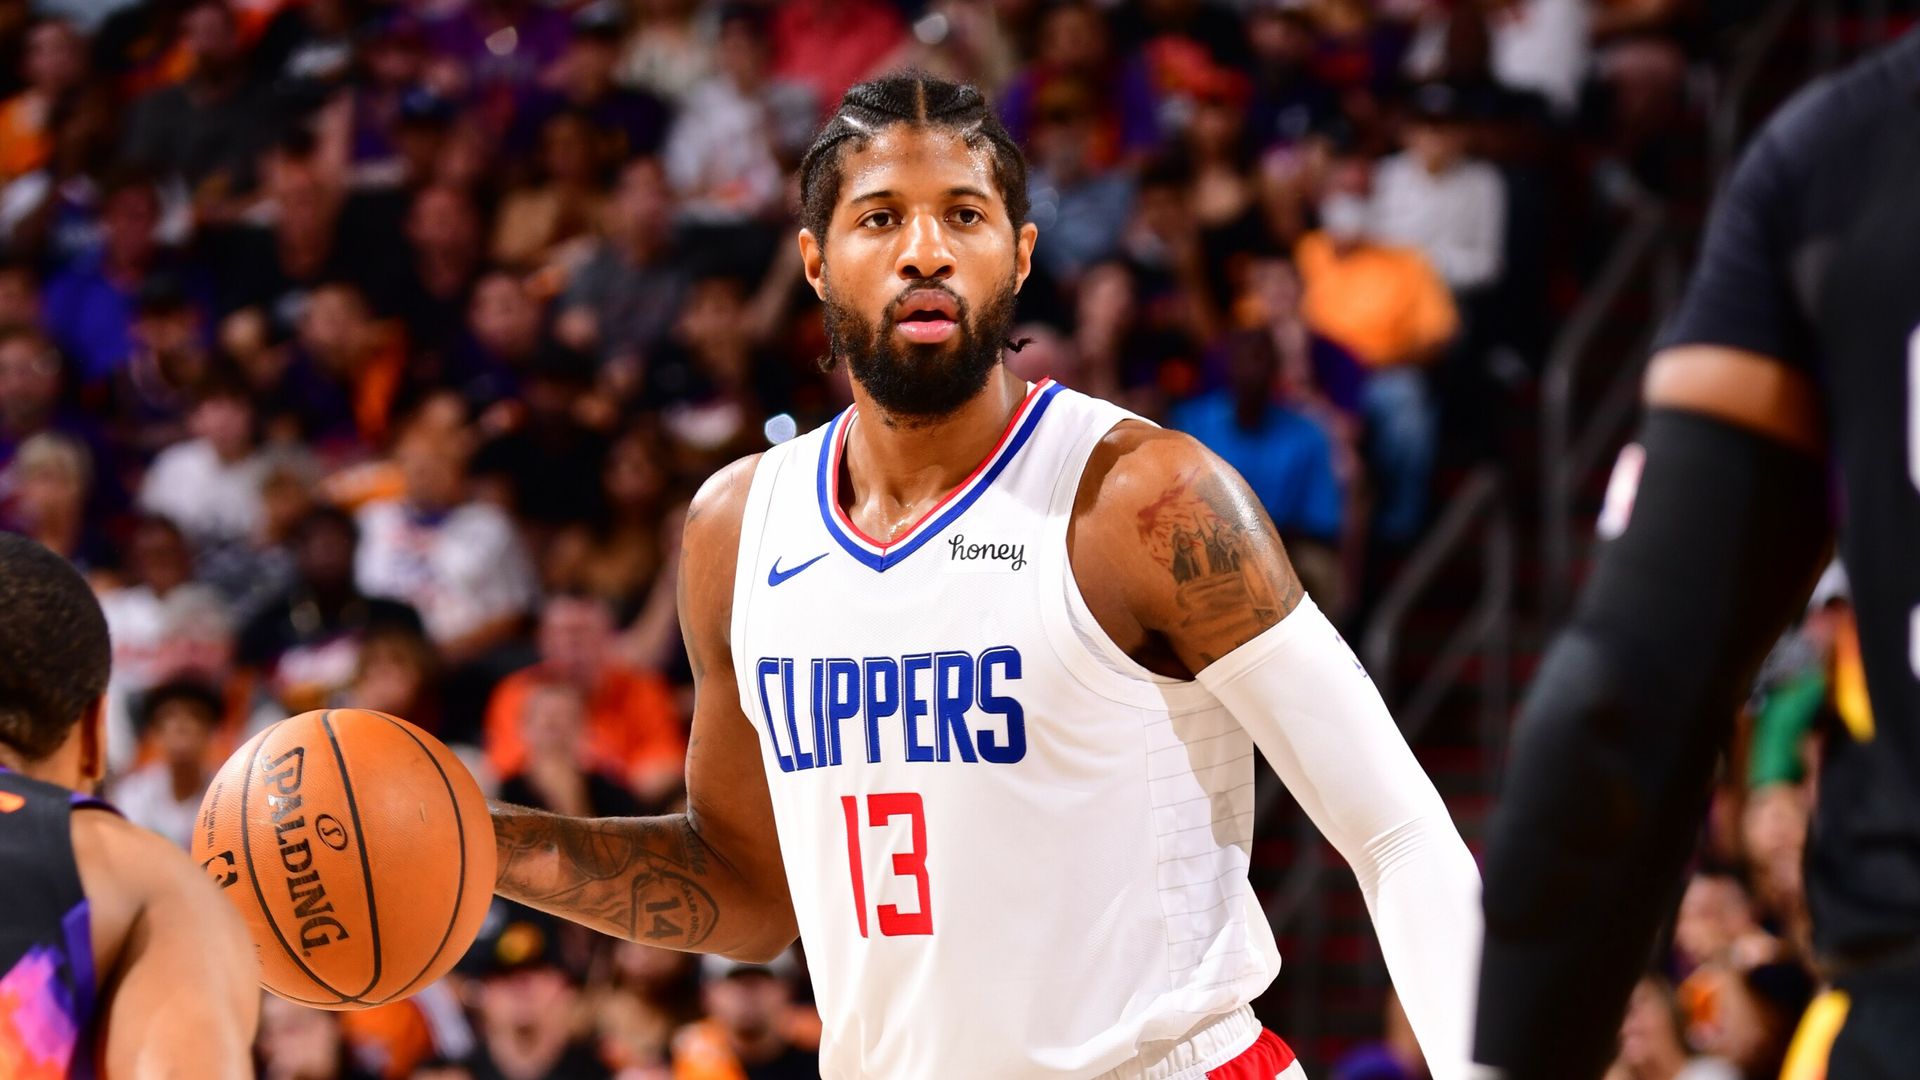 George's 41 points keep Clippers alive against Suns